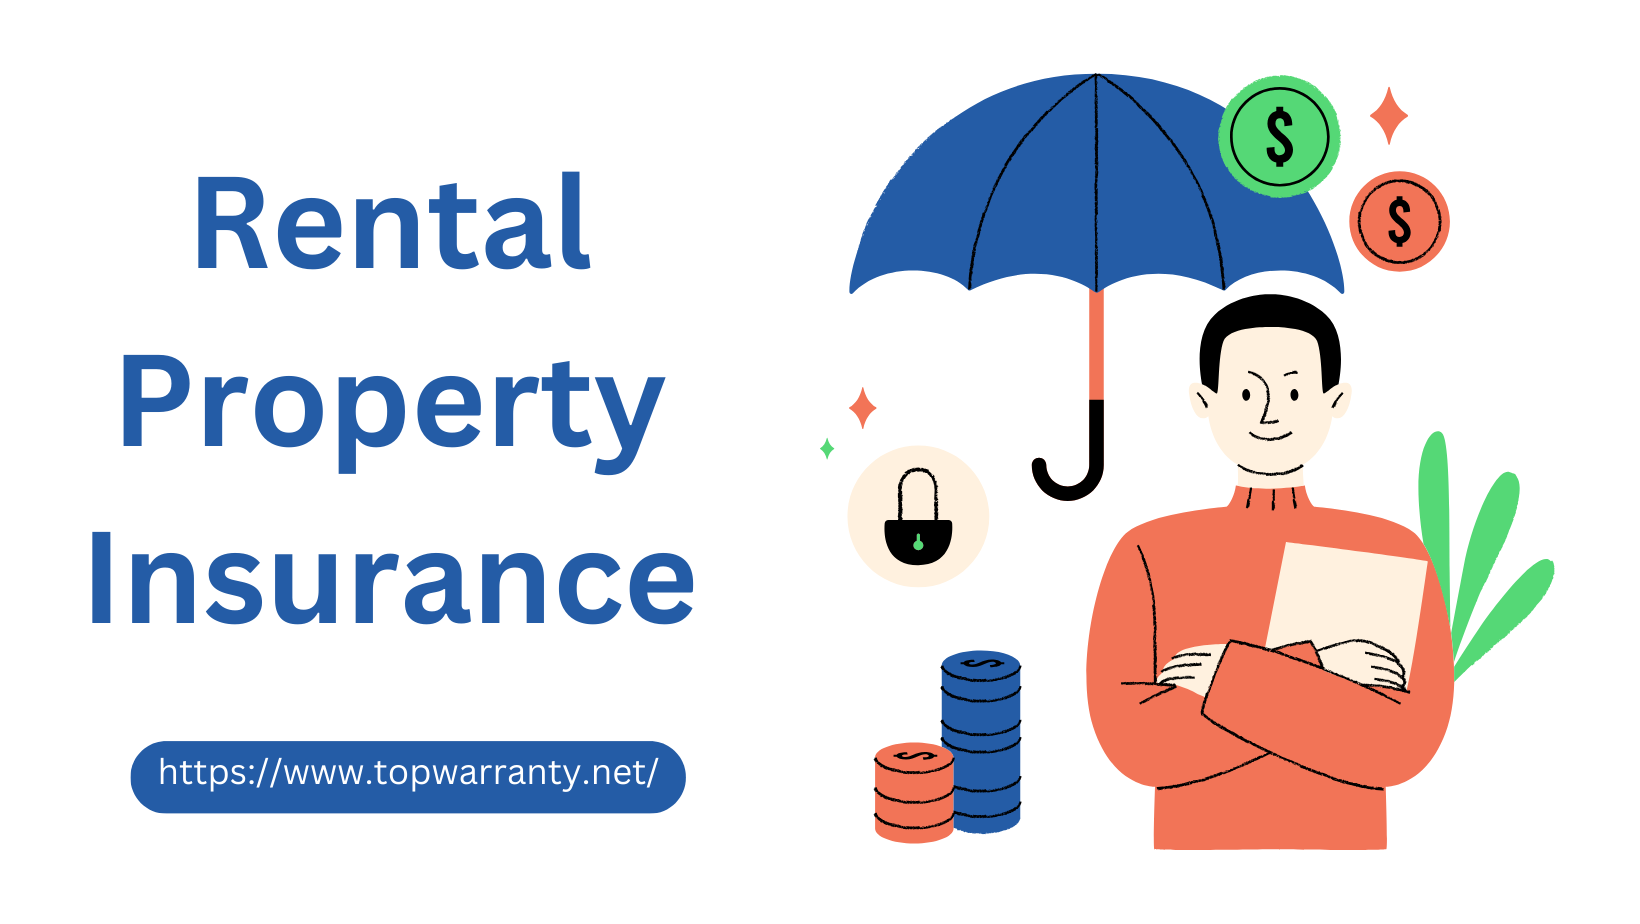 Rental Property Insurance Essential Home Insurance Tips